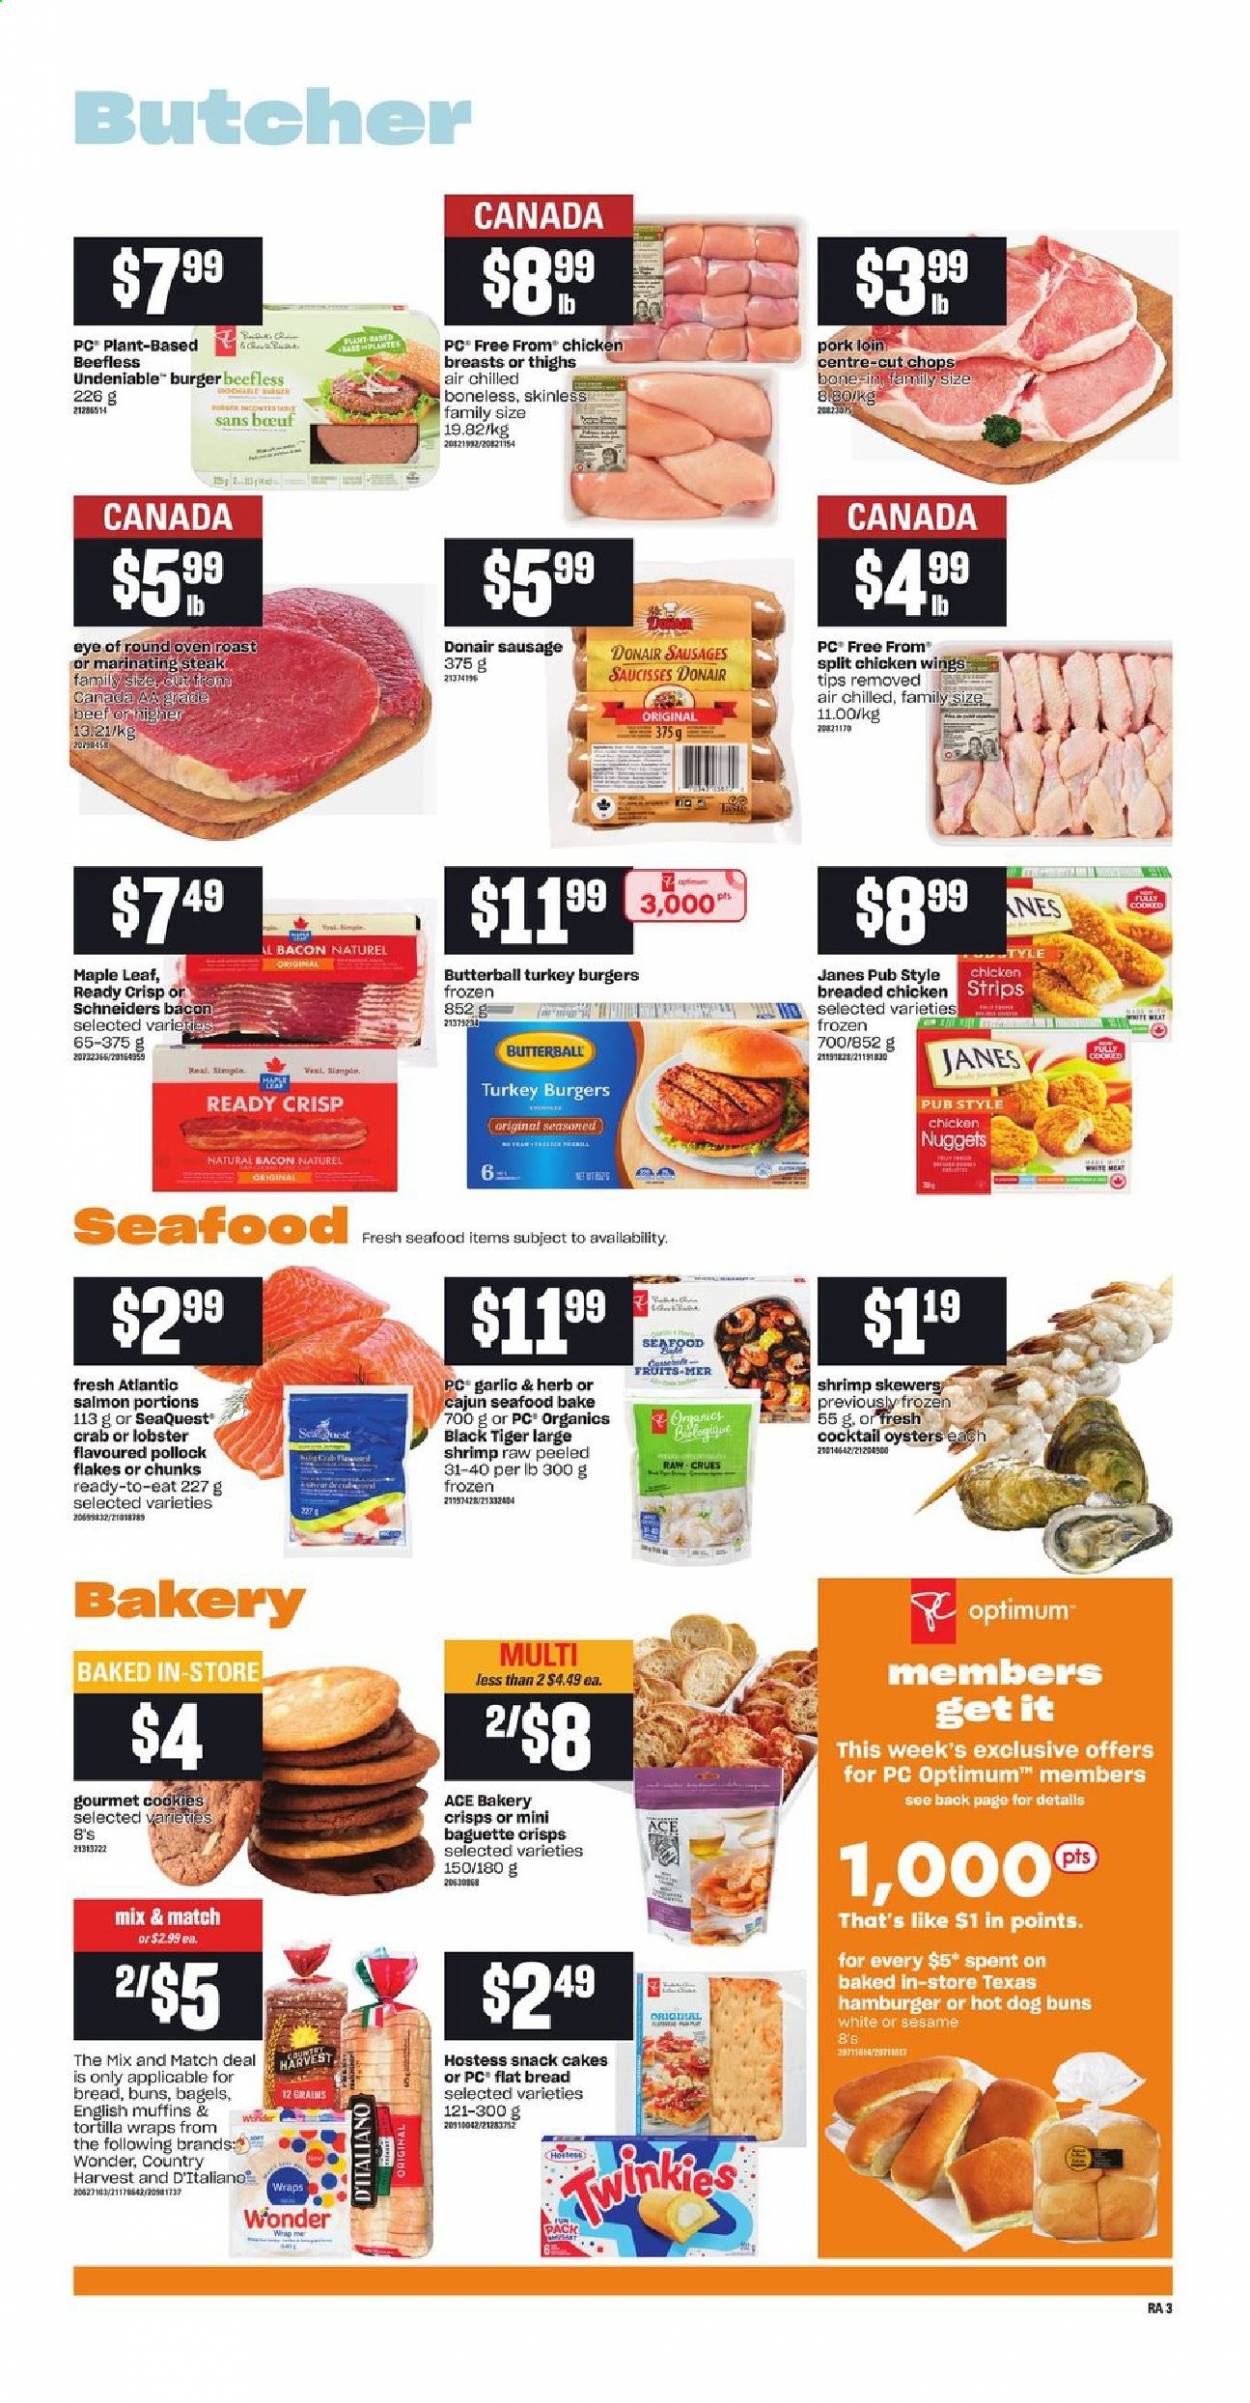 thumbnail - Atlantic Superstore Flyer - May 27, 2021 - June 02, 2021 - Sales products - bagels, english muffins, tortillas, cake, buns, ACE Bakery, wraps, lobster, salmon, pollock, oysters, seafood, crab, shrimps, nuggets, fried chicken, chicken nuggets, bacon, Butterball, sausage, Country Harvest, chicken wings, strips, chicken strips, cookies, snack, chicken, eye of round, turkey burger, pork loin, pork meat, Optimum, steak. Page 4.